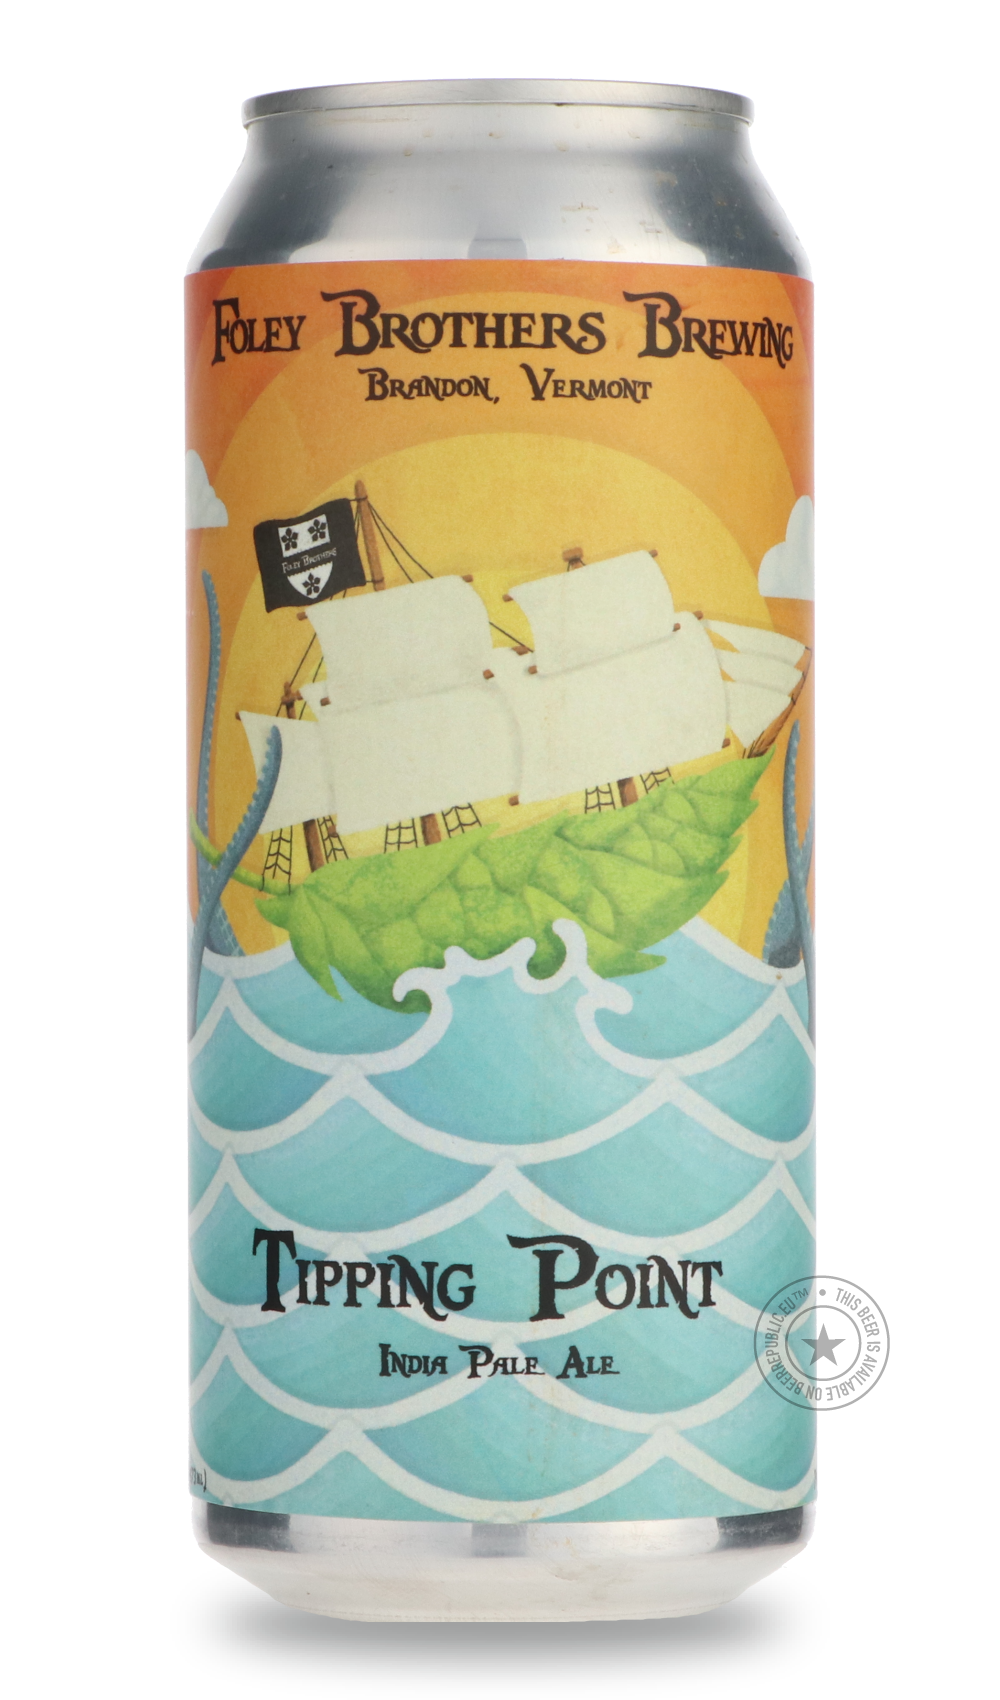 -Foley Brothers- Tipping Point-IPA- Only @ Beer Republic - The best online beer store for American & Canadian craft beer - Buy beer online from the USA and Canada - Bier online kopen - Amerikaans bier kopen - Craft beer store - Craft beer kopen - Amerikanisch bier kaufen - Bier online kaufen - Acheter biere online - IPA - Stout - Porter - New England IPA - Hazy IPA - Imperial Stout - Barrel Aged - Barrel Aged Imperial Stout - Brown - Dark beer - Blond - Blonde - Pilsner - Lager - Wheat - Weizen - Amber - Ba